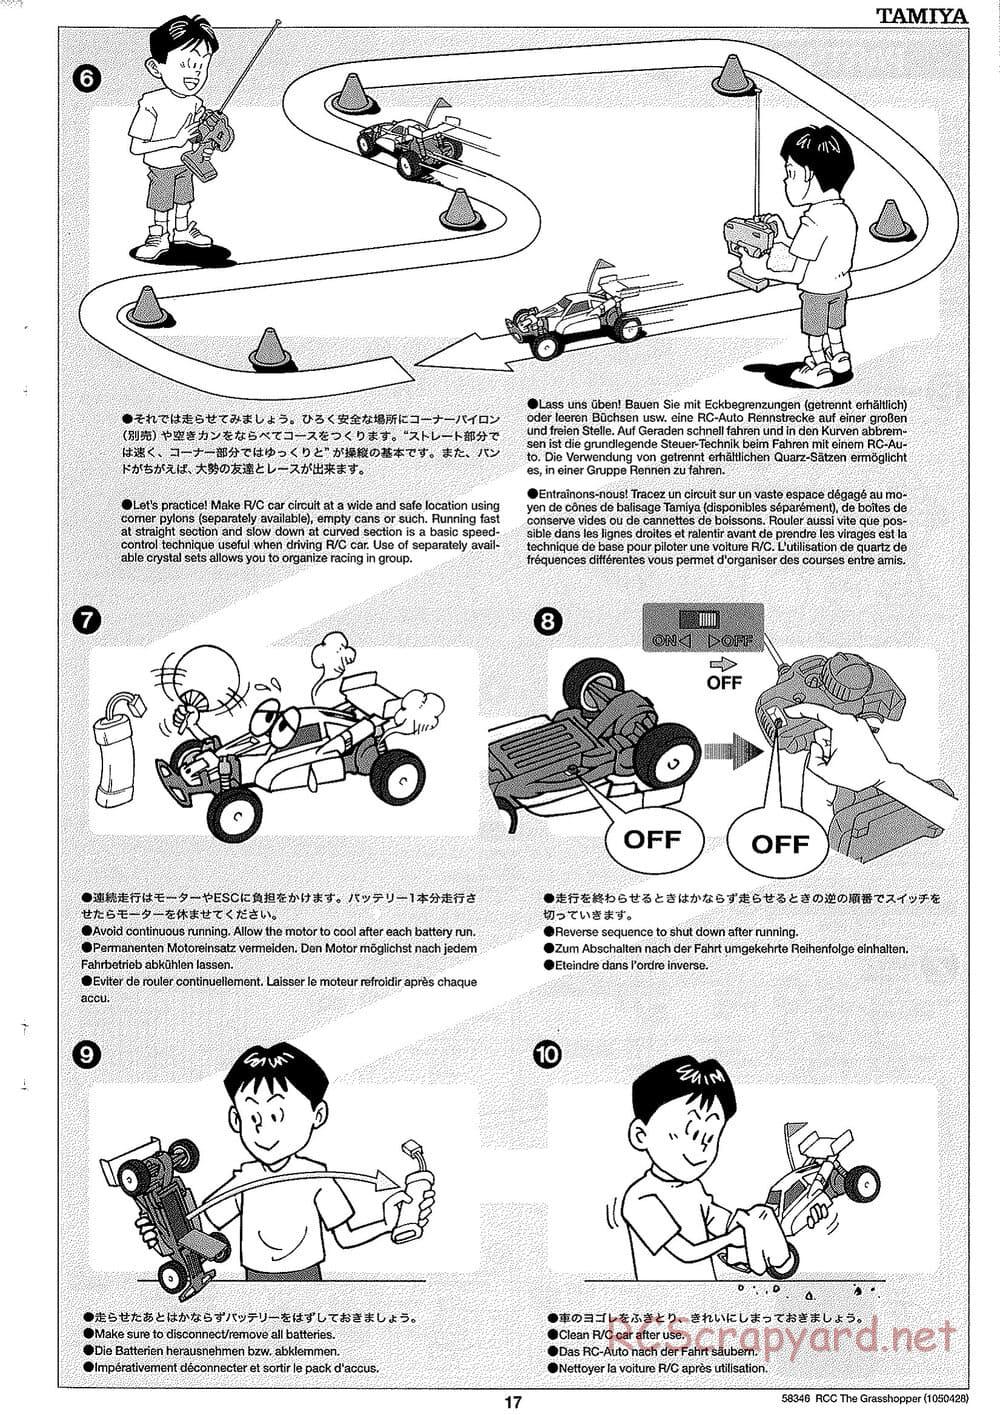 Tamiya - The Grasshopper (2005) - GH Chassis - Manual - Page 17